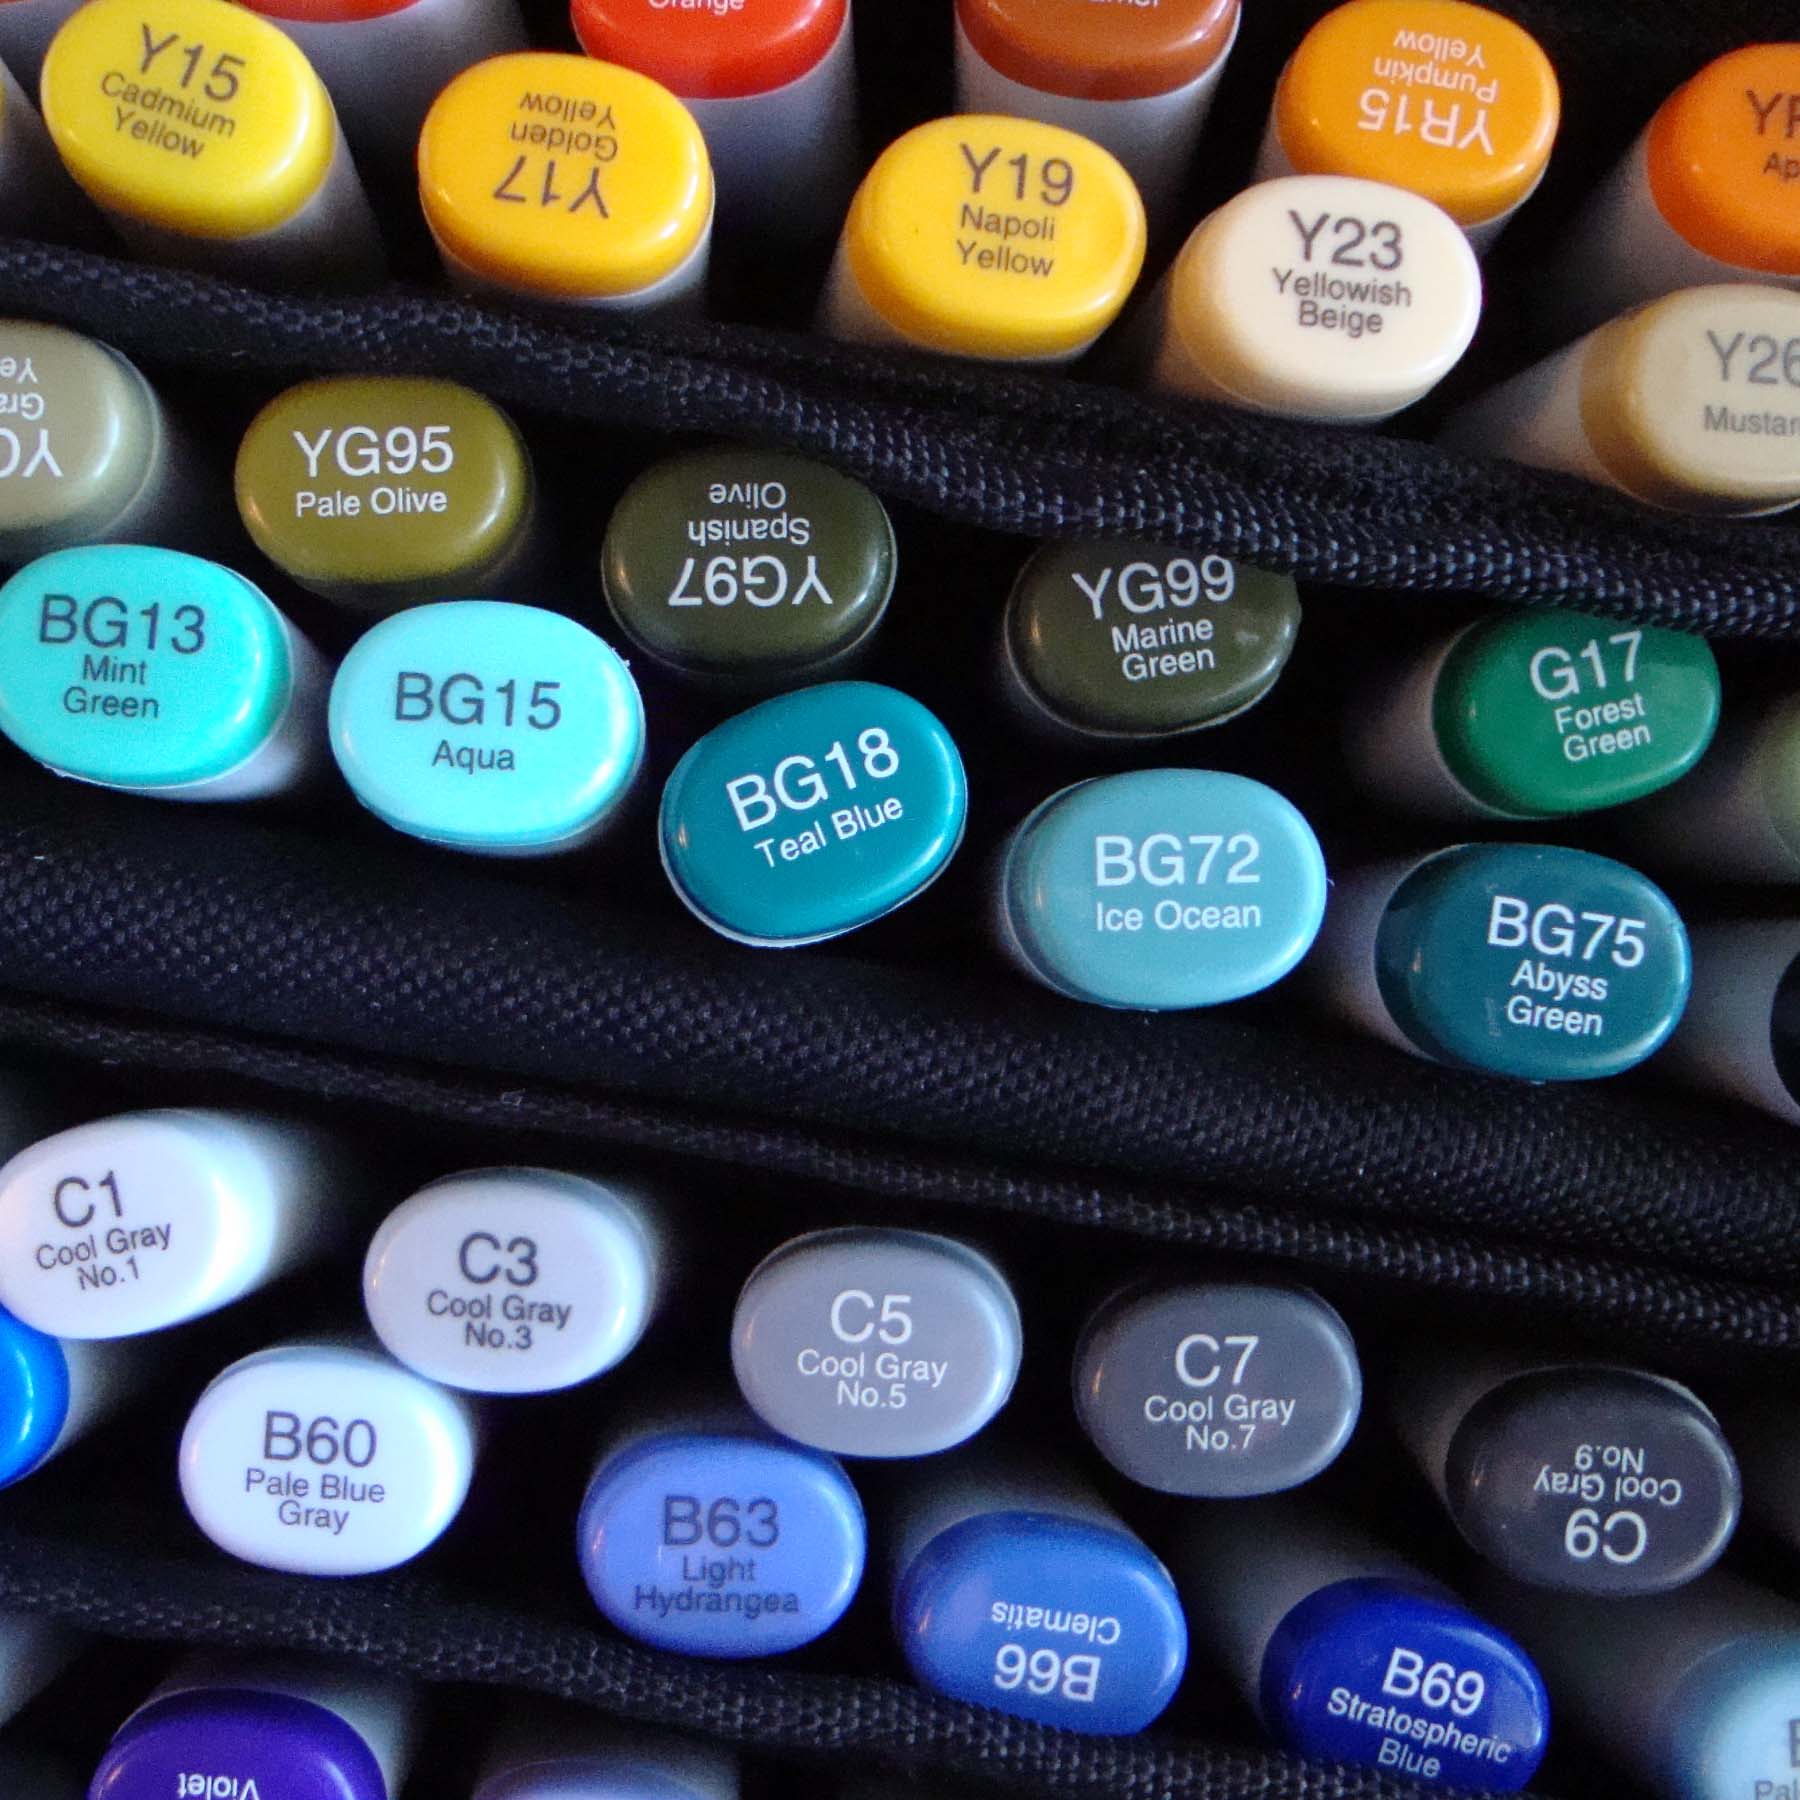 50 SHADES OF GREY MARKERS: HOW TO DECIDE WHAT YOU NEED